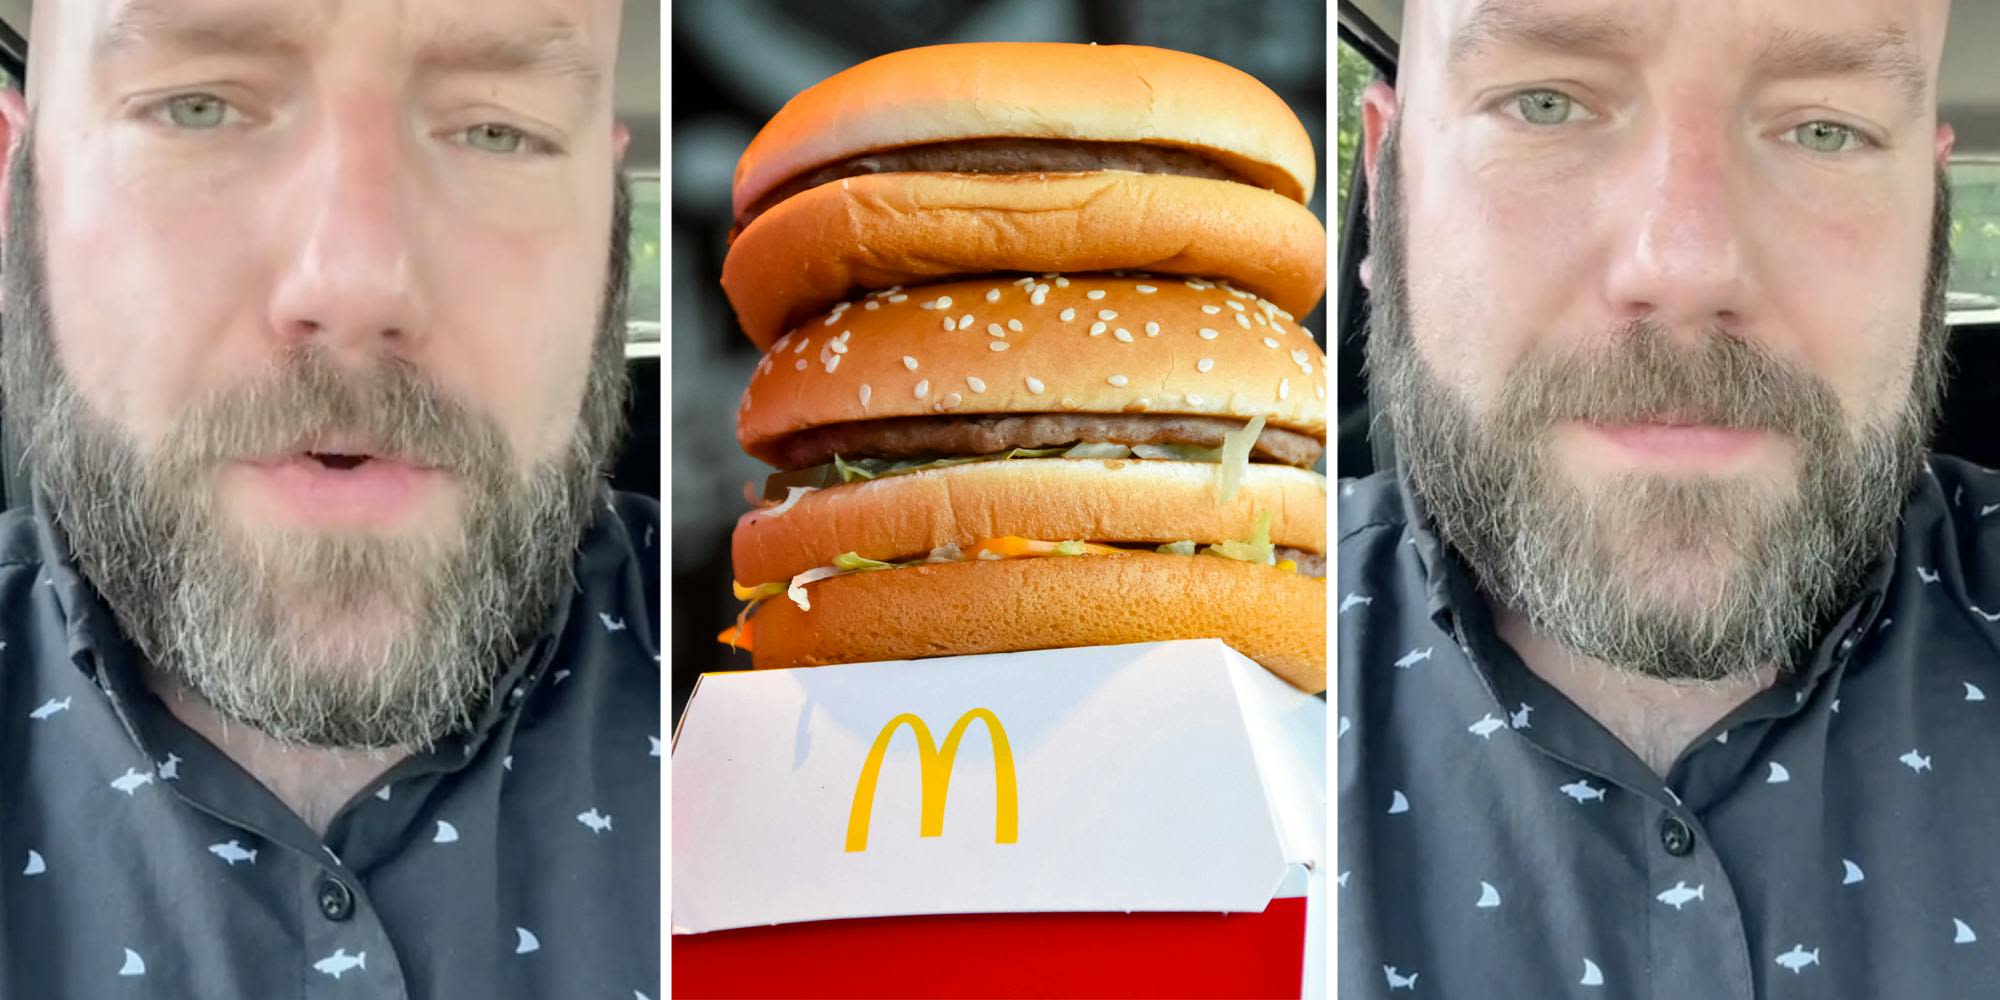 ‘McDonald’s is sabotaging their food items’: Expert thinks McDonald’s is making their burgers ‘bad on purpose.’ Here’s why